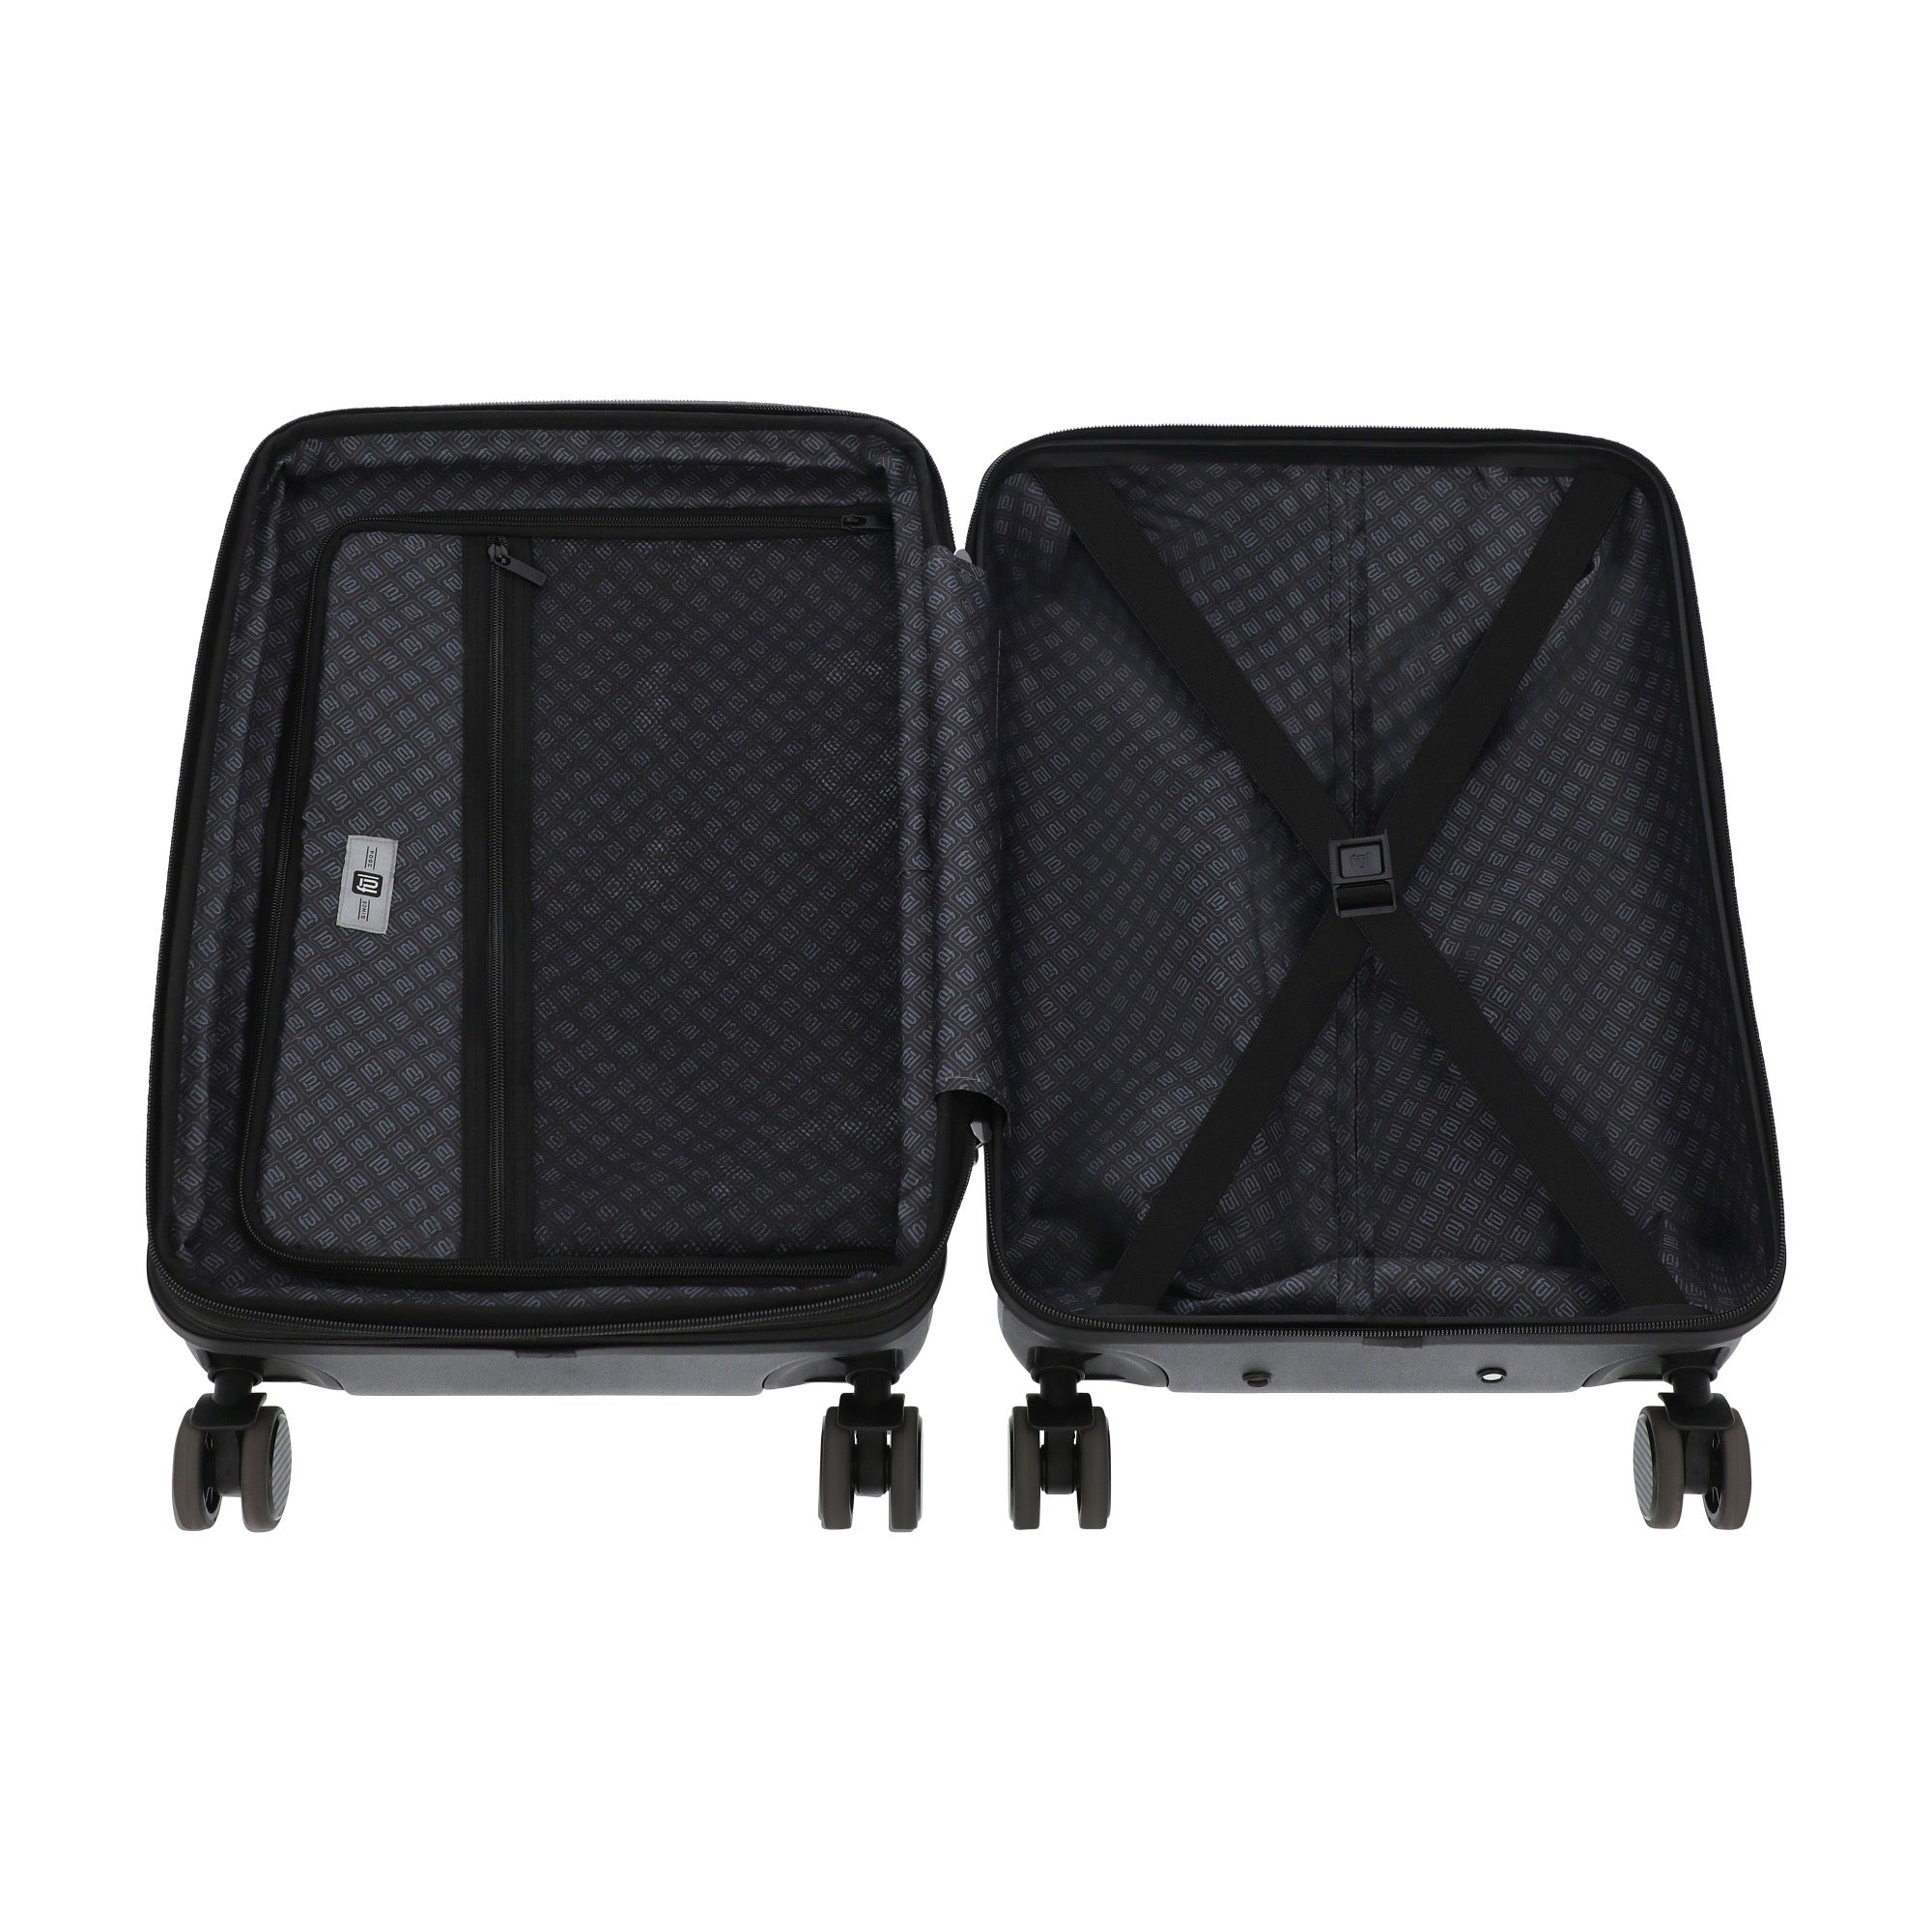 22.5" carry-on spinner suitcase luggage by Ful